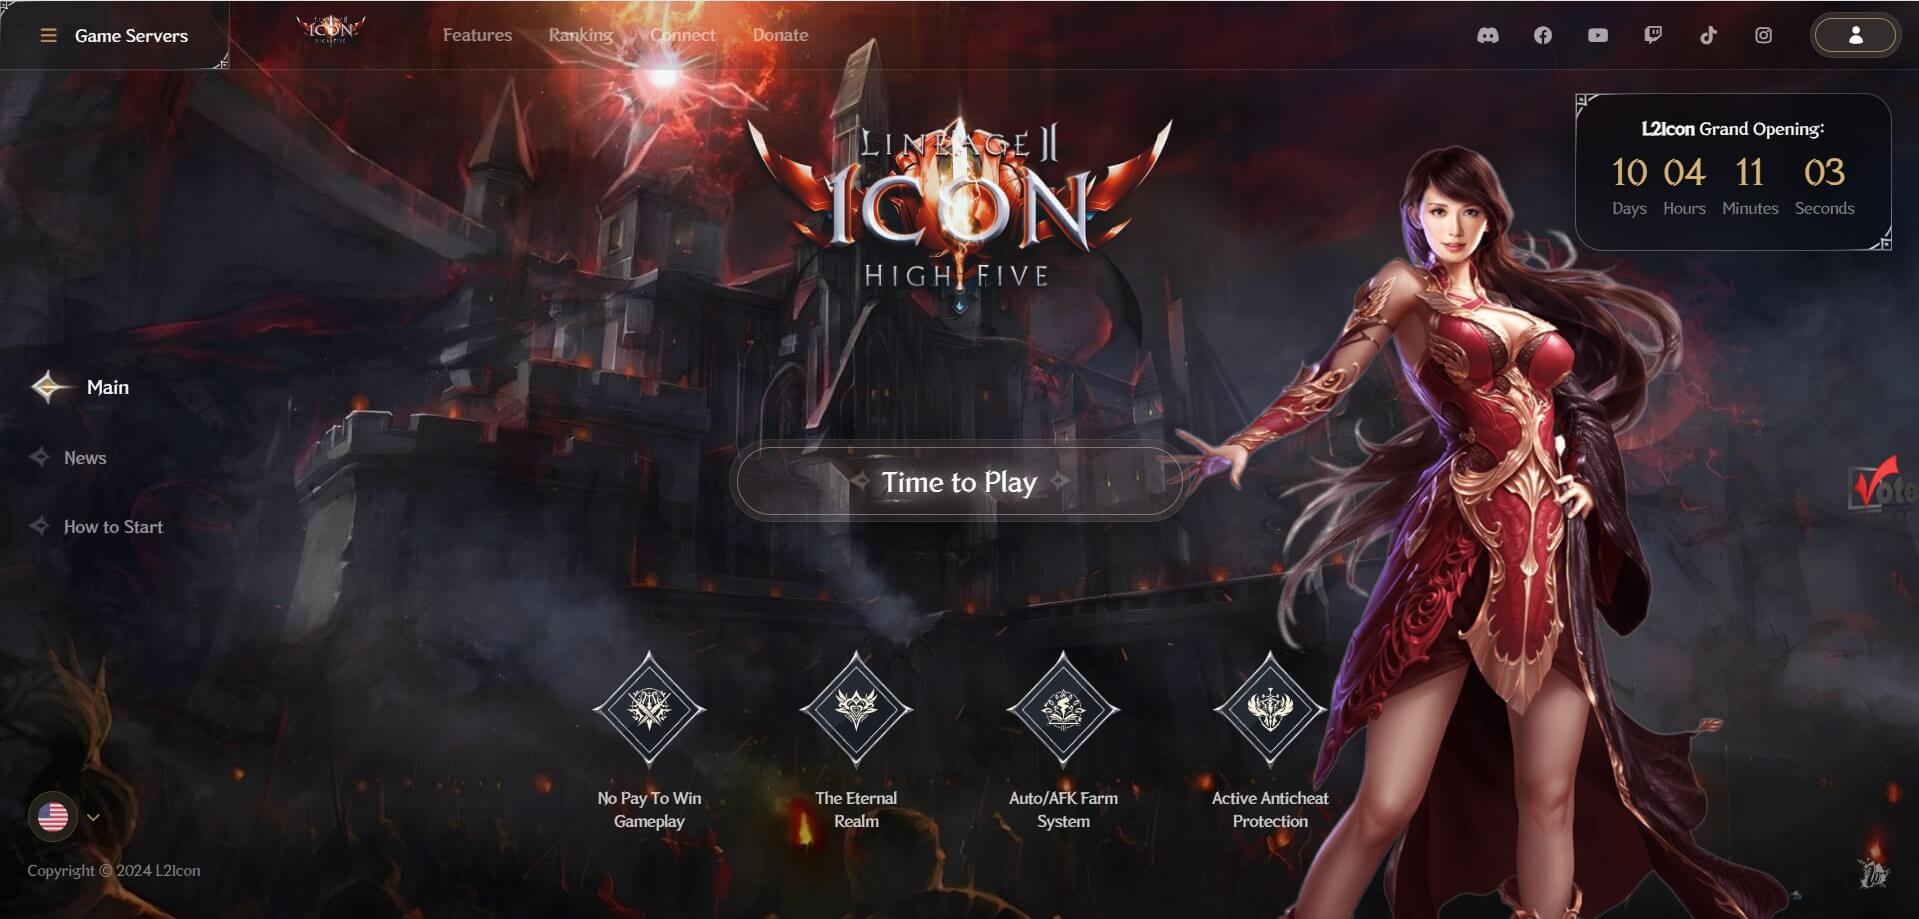 🌟🔥 Welcome to Lineage 2 High Five server with x15 rates on l2-icon.com! Exciting adventures await you! 🔥🌟